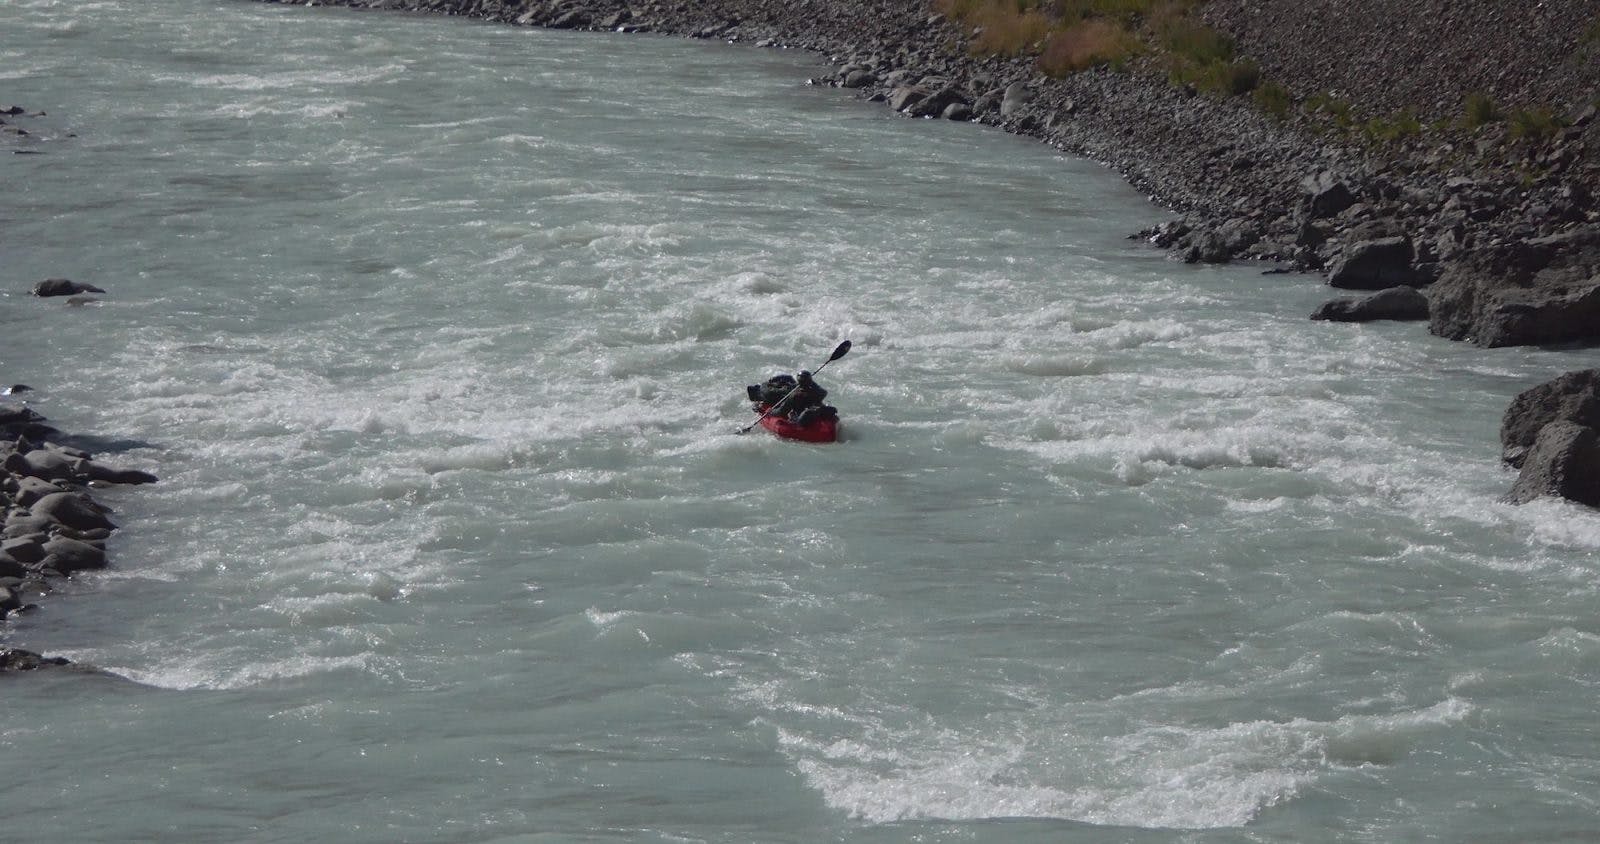 Mike McGrath pack rafting the Naryn River, Kyrgyzstan.